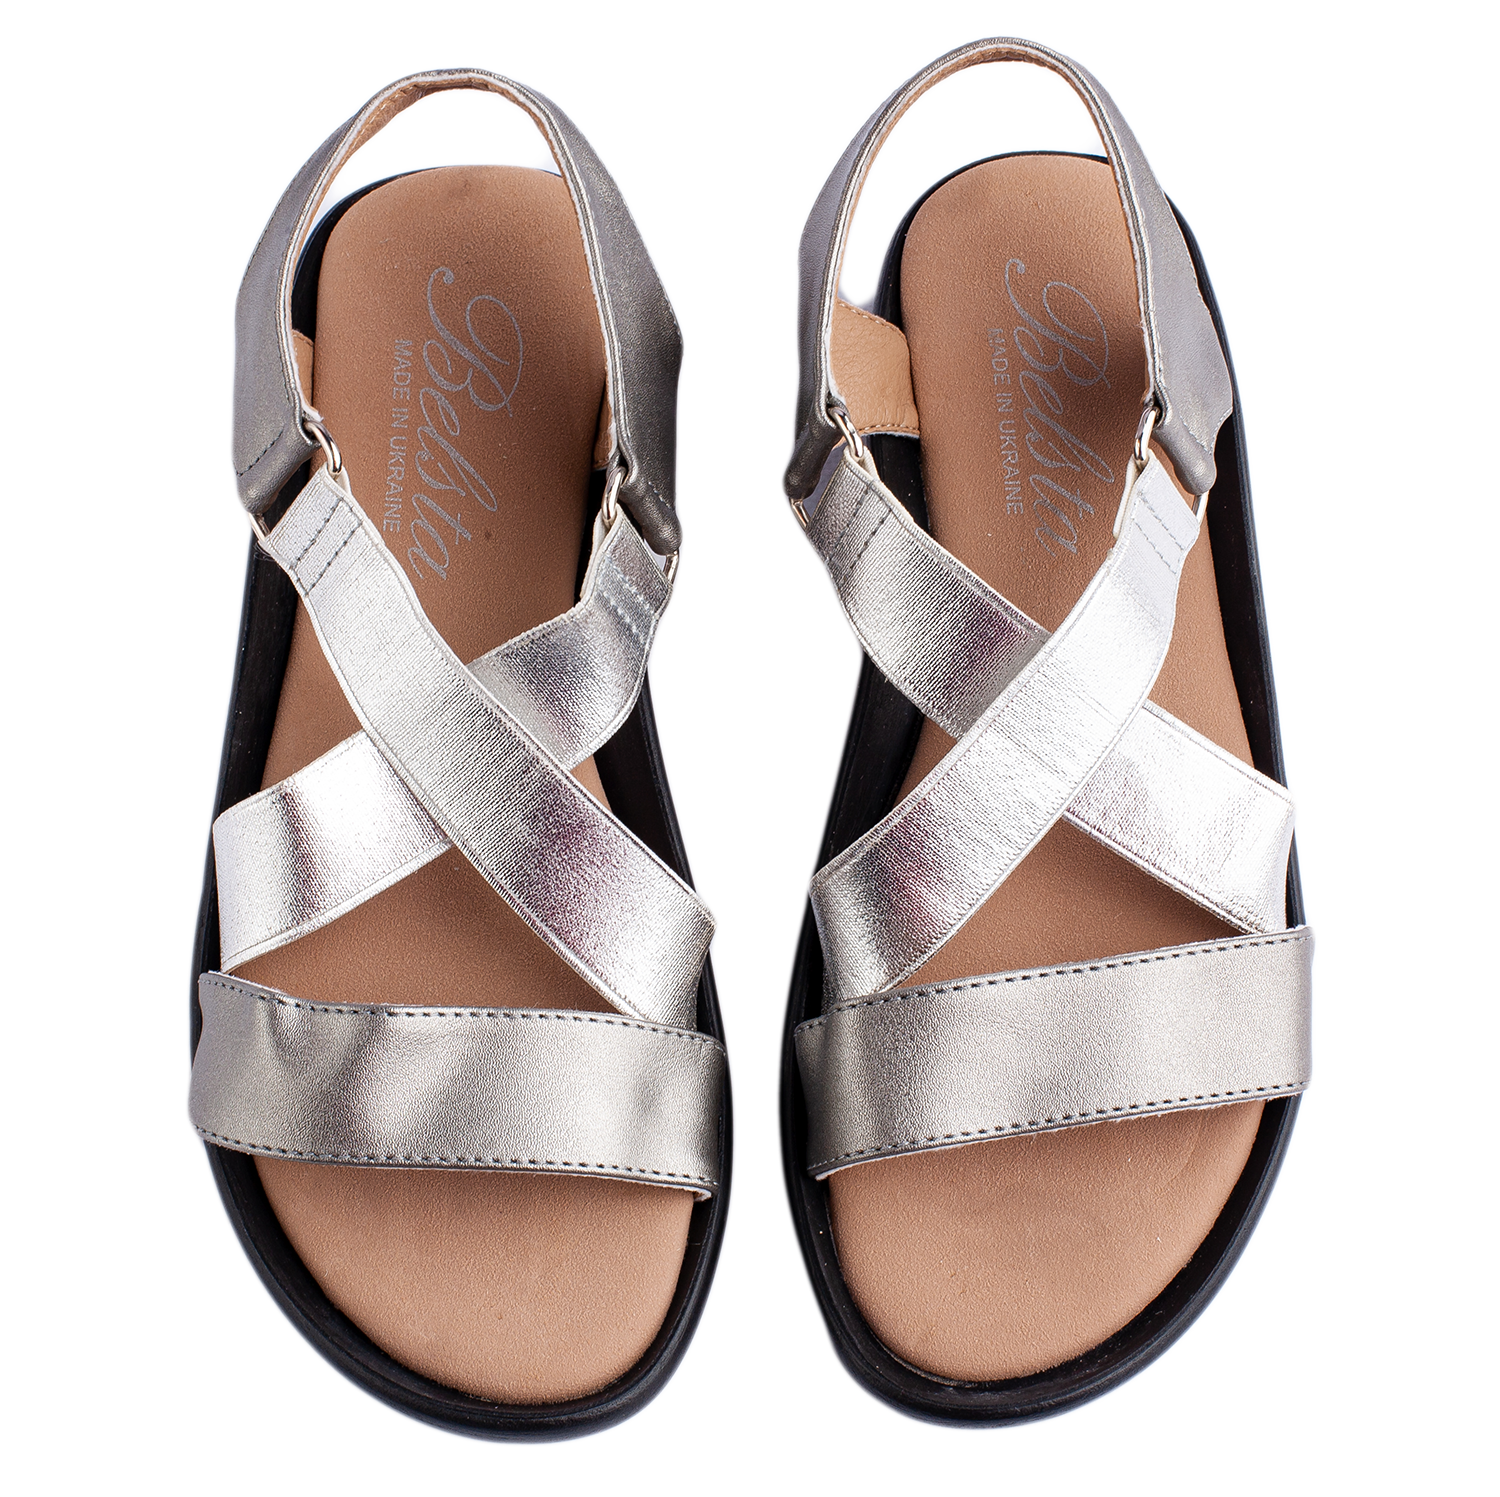 Women's sandals with an elastic by BELSTA - 2